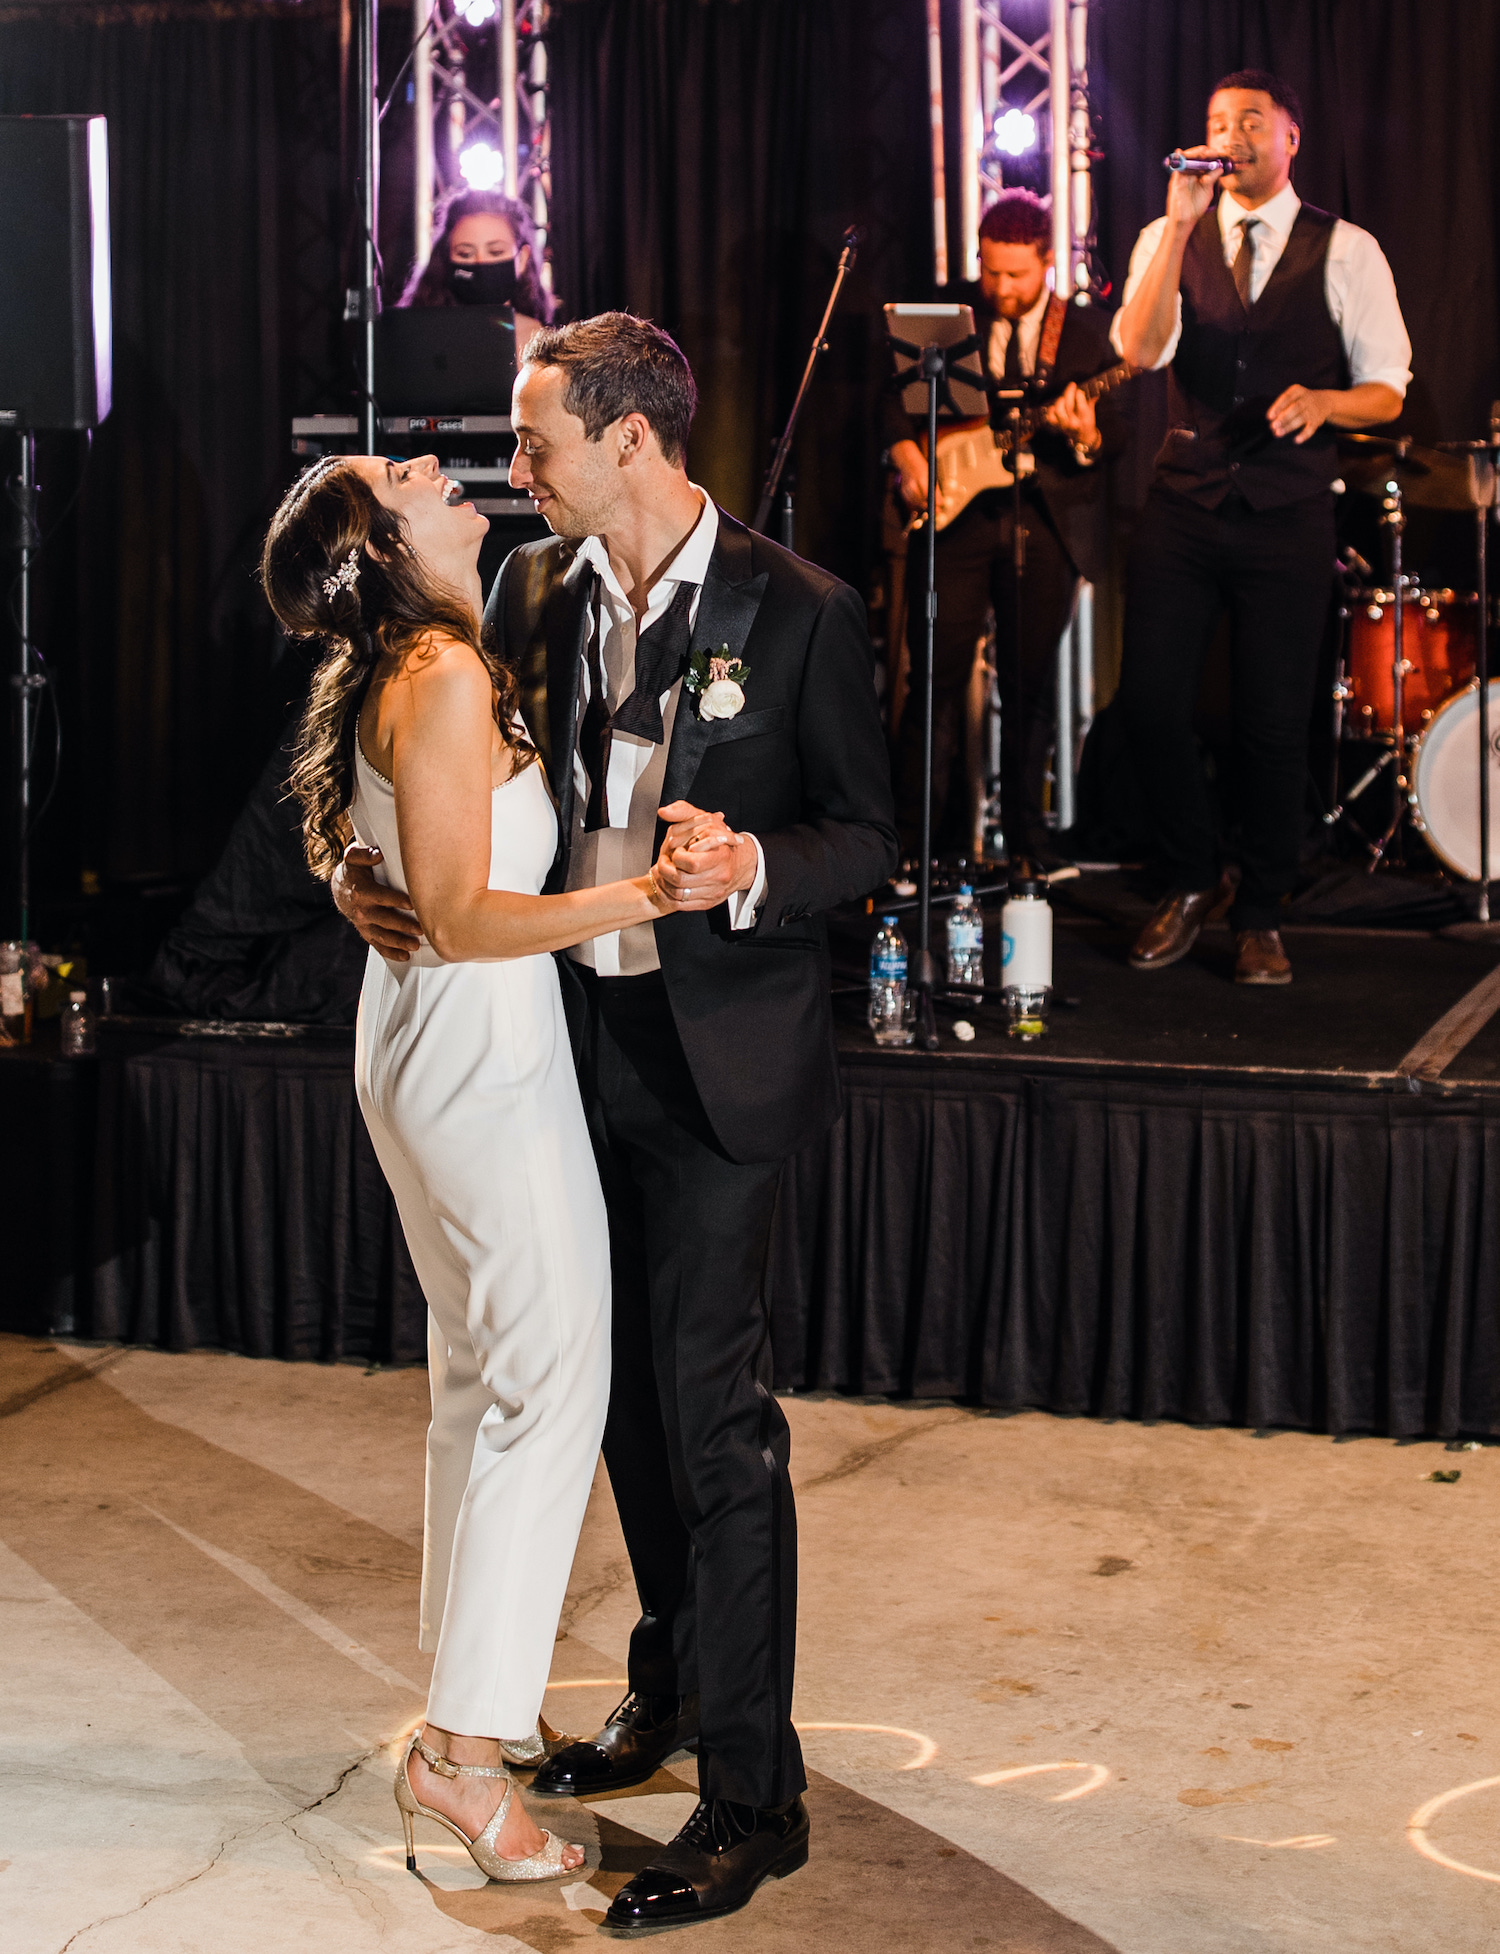 Bride and groom share an intimate last dance in their empty venue. The bride is wearing a one shoulder white jumpsuit that she changed into for the end of the celebrations.